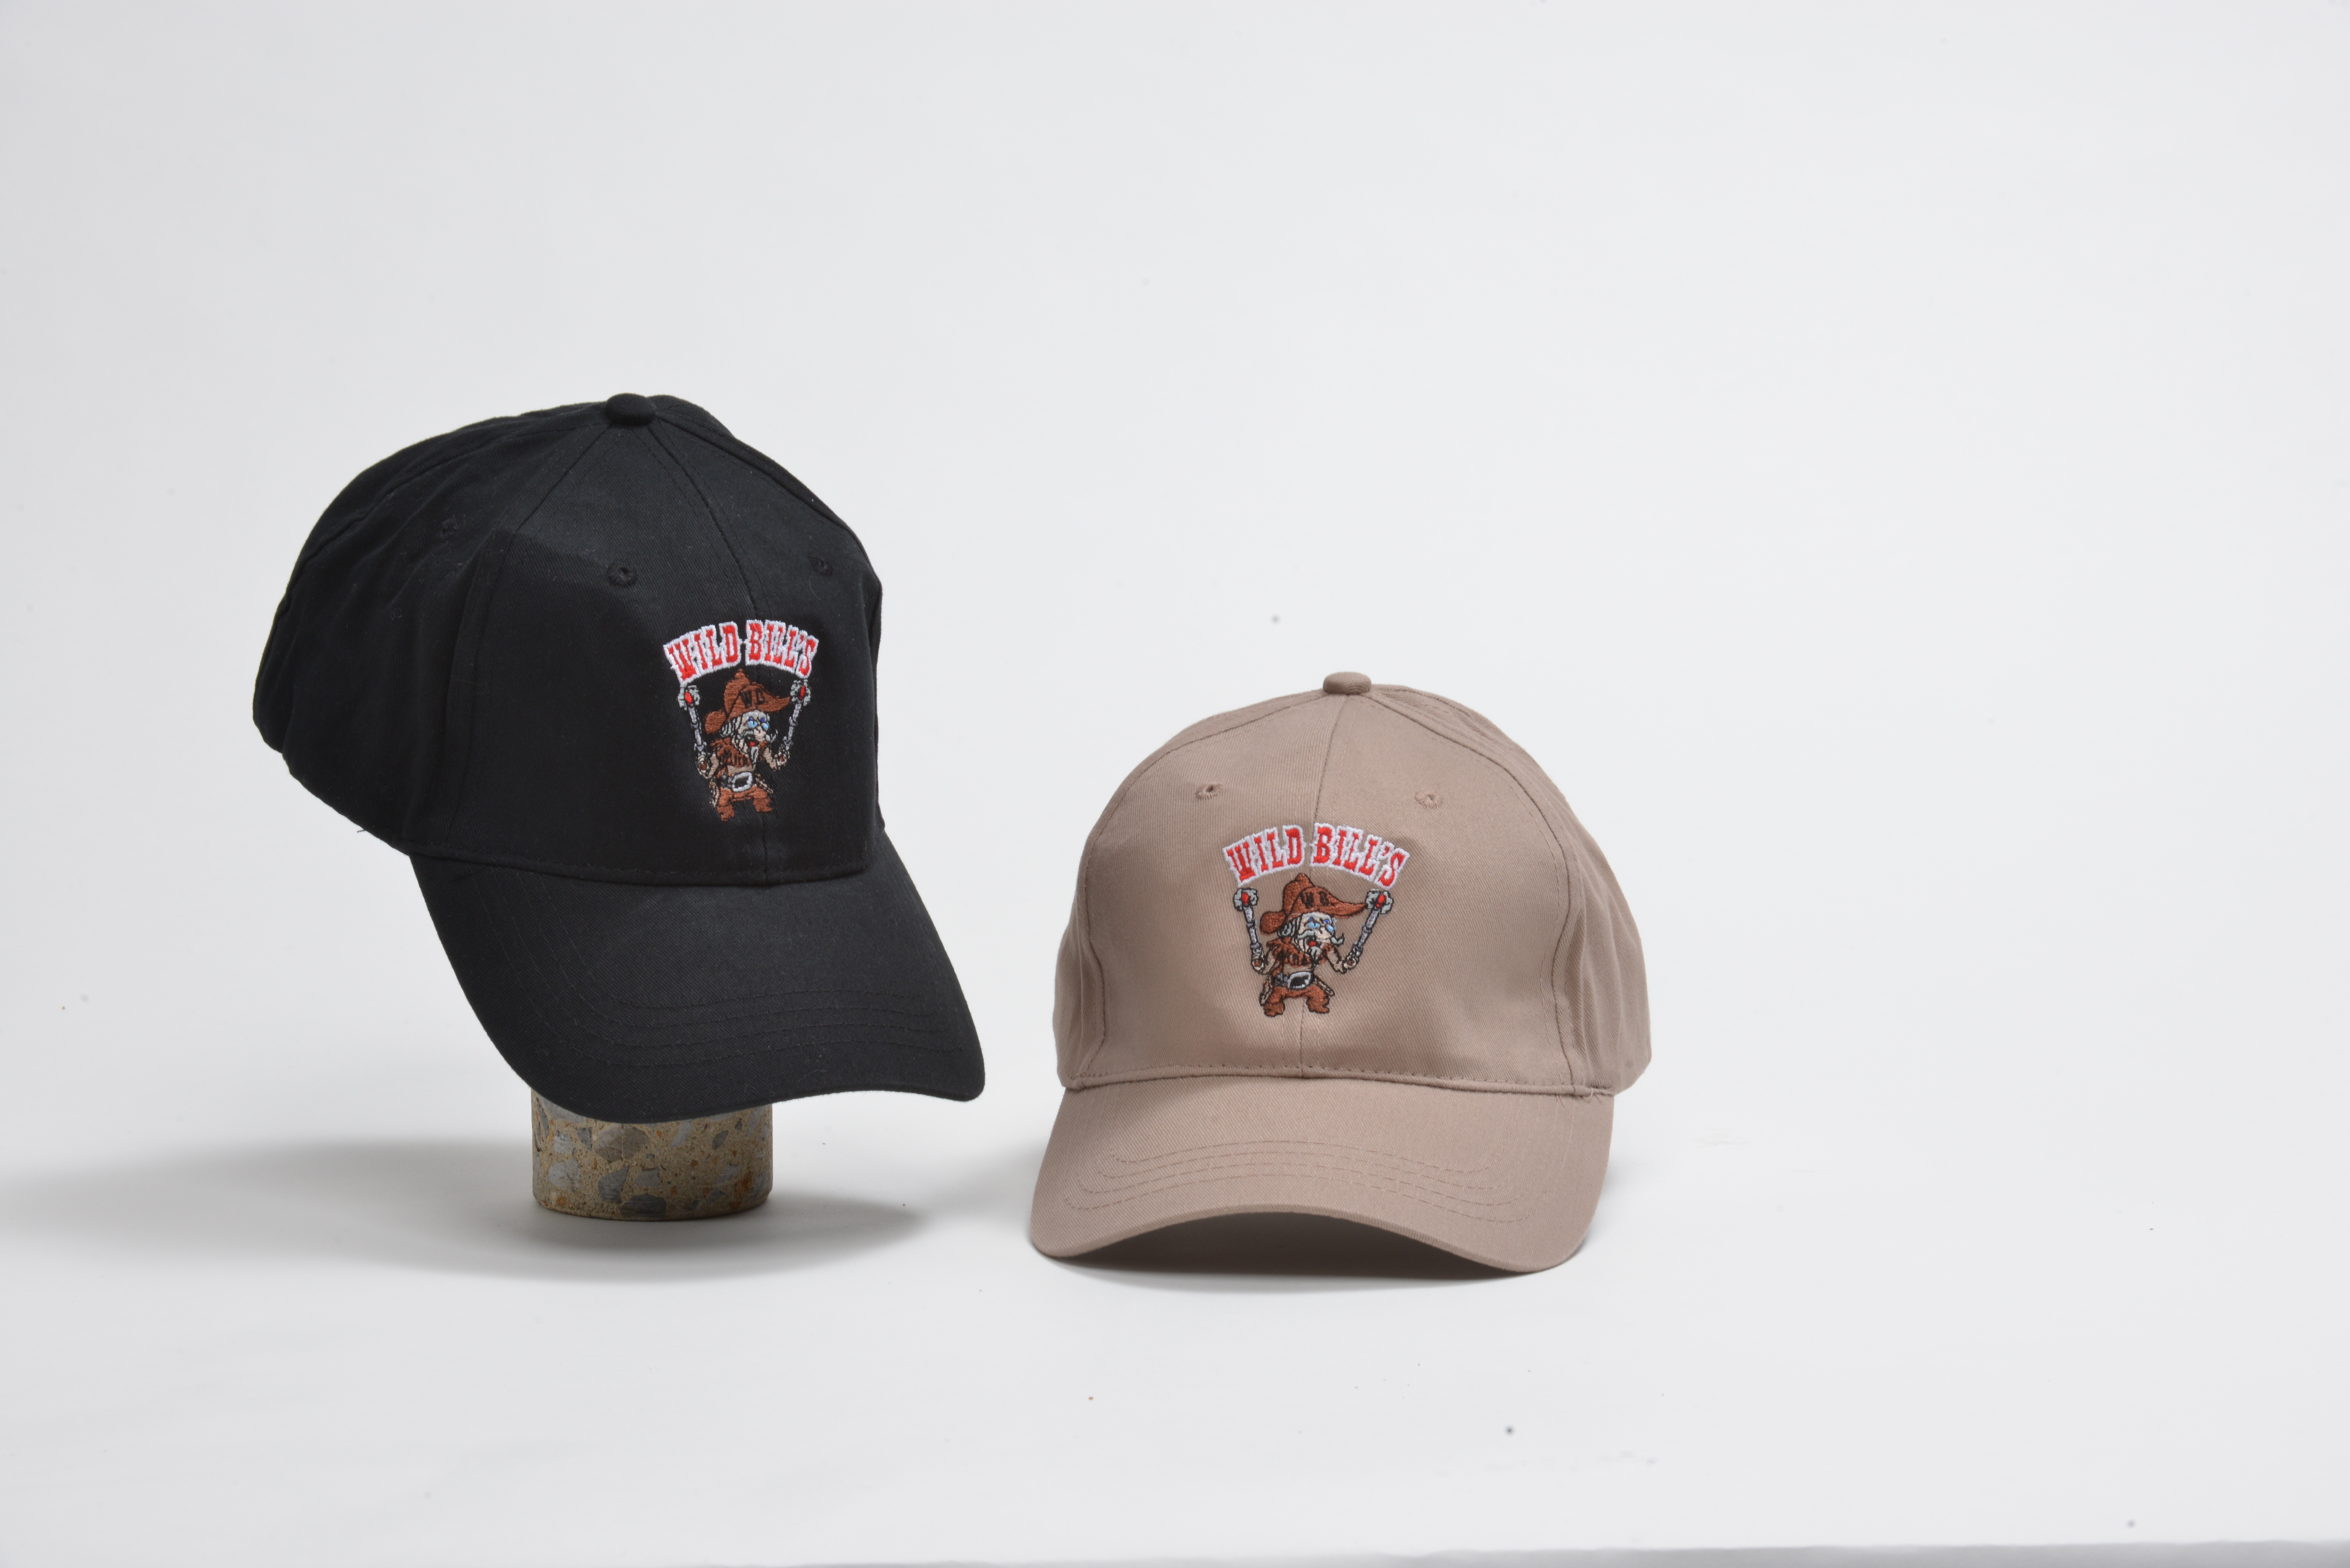 In black or stone, our multi-thread count embroidered hat will let everyone know you’re a Wild Bill’s fan!